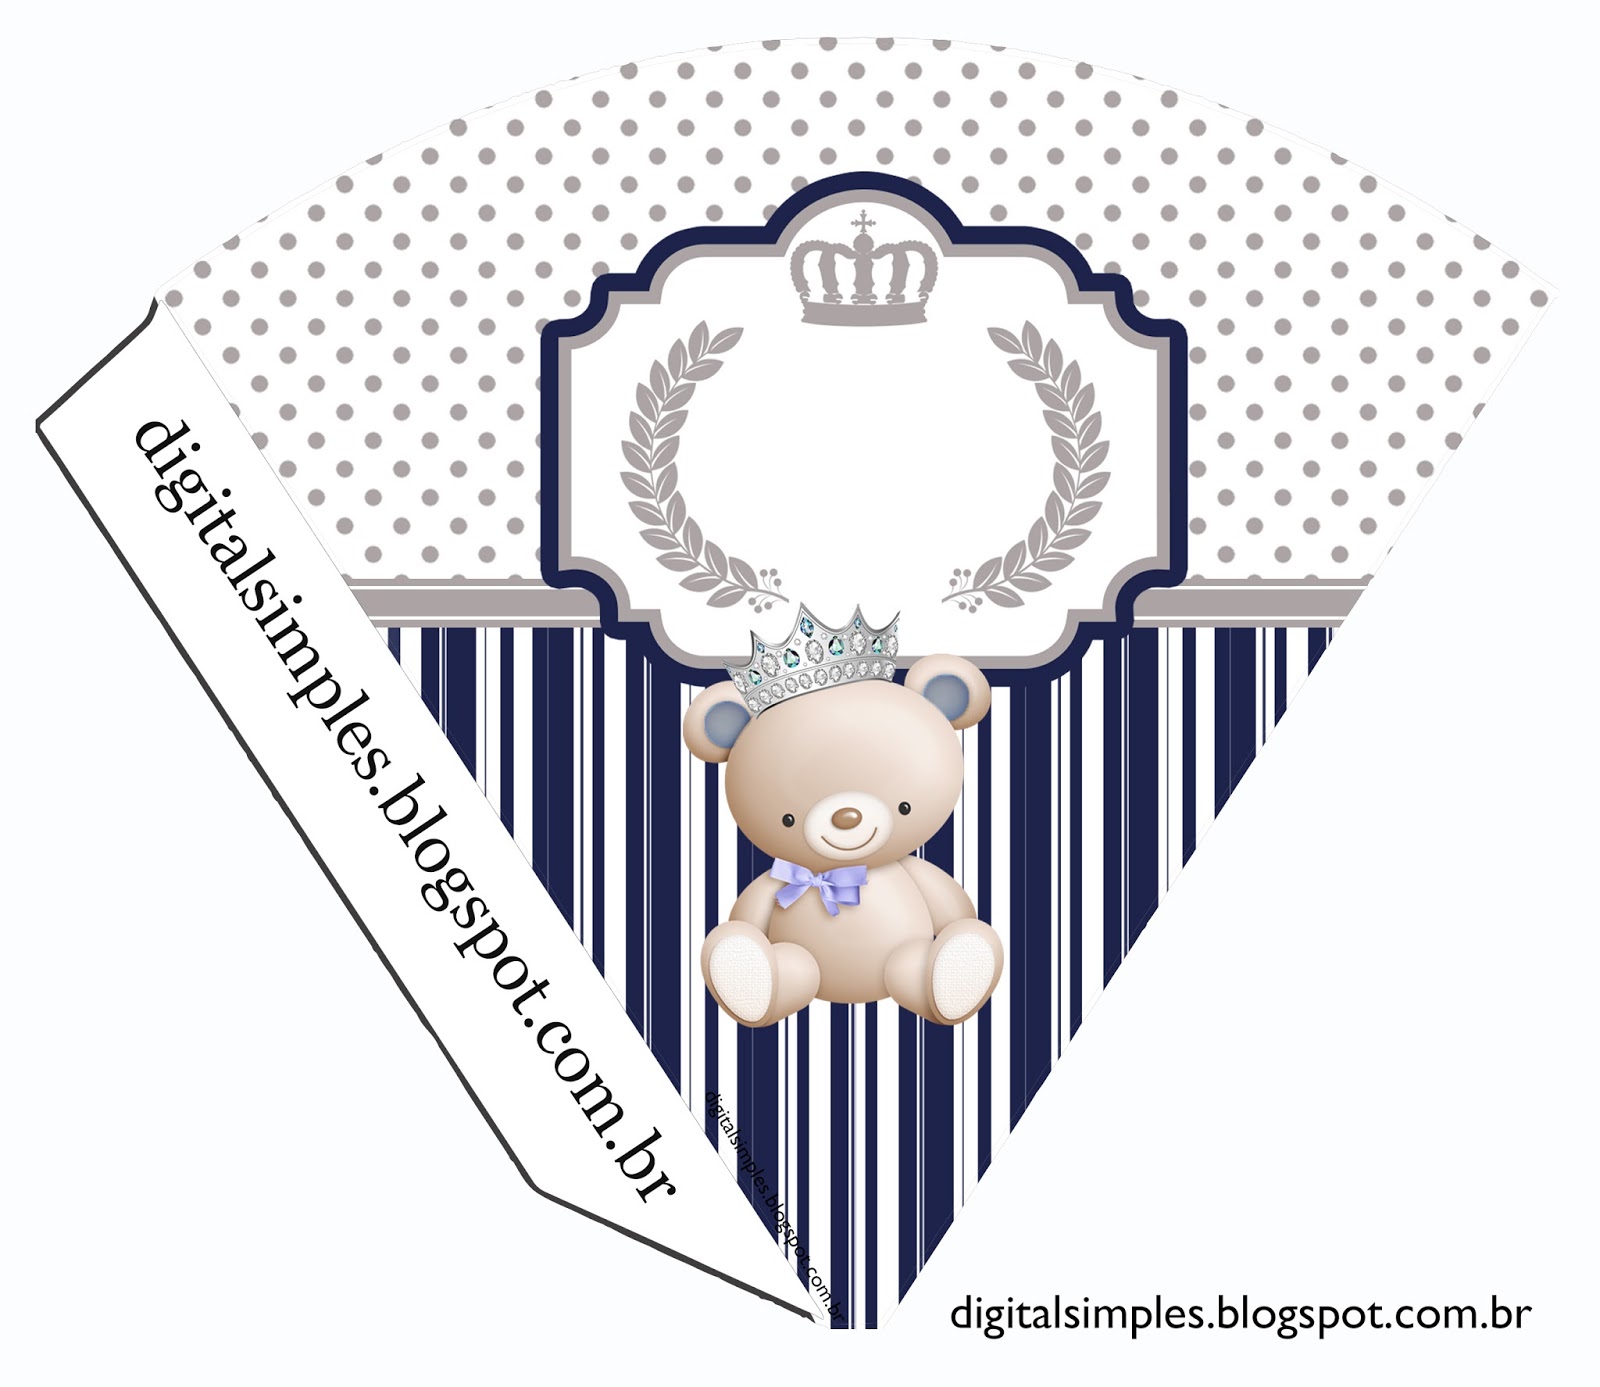 Bear Charming Prince Free Party Printables. - Oh My Baby!